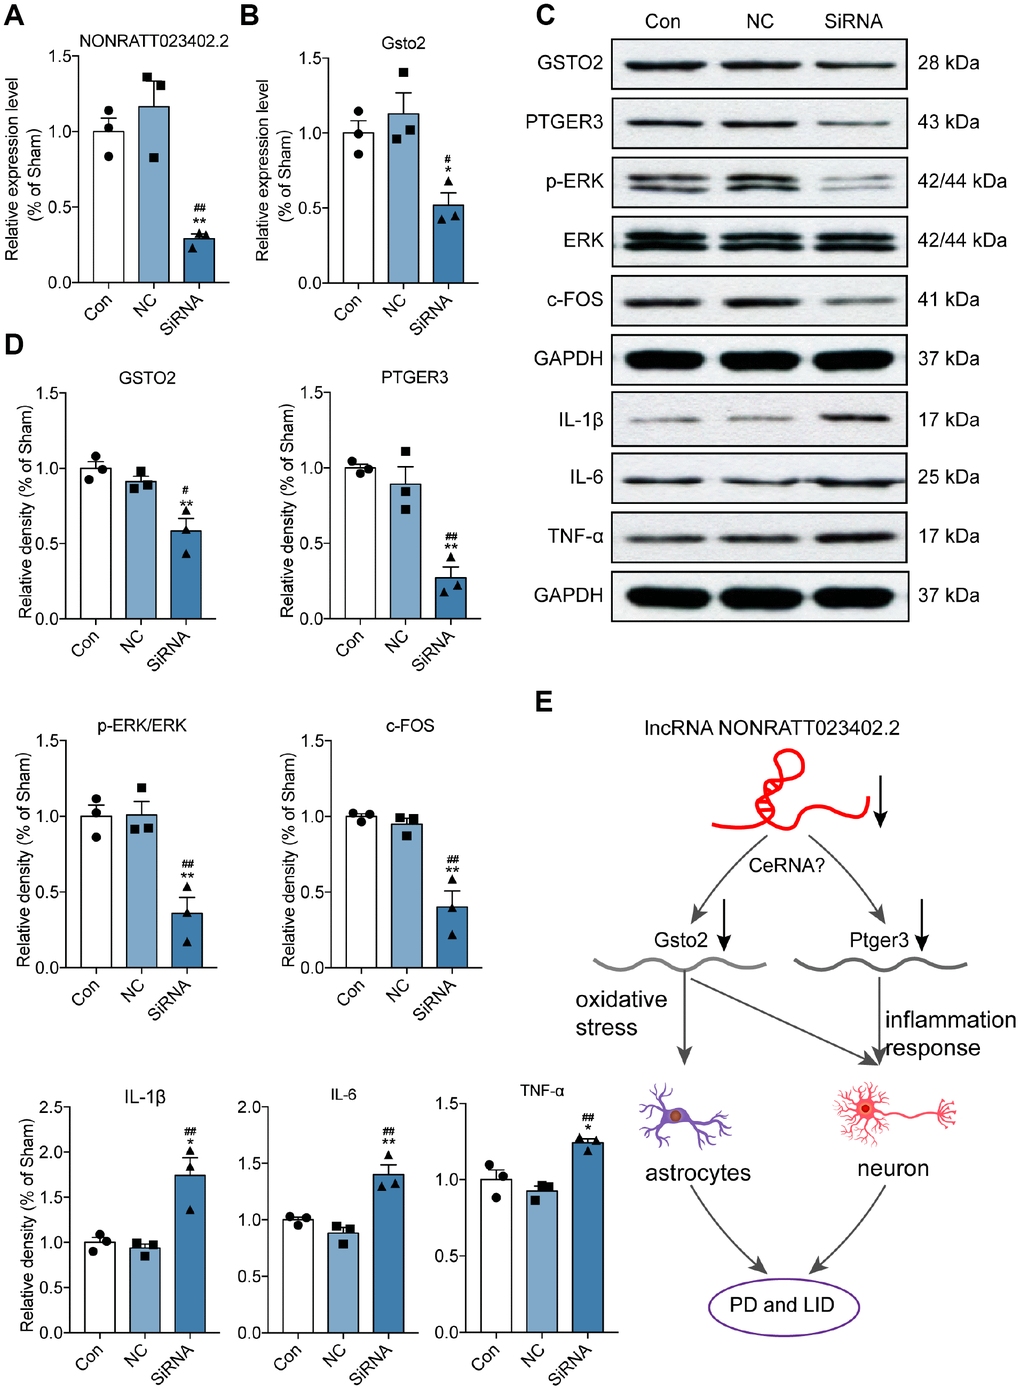 Slicing lncRNA NONRATT023402.2 inhibited Gsto2 and Ptger3, and promoted inflammatory response in vivo. (A, B) qRT-PCR detection of NONRATT023402.2 and Gsto2 levels in rat PC12 cells transfected with NONRATT023402.2 siRNA (n = 3). (C, D) Protein levels of GSTO2, PTGER3, c-FOS, p-EERK, ERK, IL-1β, IL-6 and TNF-α in PC12 cells transfected with NONRATT023402.2 siRNA (n = 3), as determined by western blotting. The signal intensity of protein bands was quantified by densitometry and normalized to that of GAPDH. (E) Schematic representation of the regulatory mechanism of NONRATT023402.2 in PD and LID. Downregulation of NONRATT023402.2 leads to the decline of GSTO2 and PTGER3, possibly through a ceRNA-type mechanism. The decrease in GSTO2 results in increased oxidative stress in neurons and astrocytes, whereas the decrease in PTGER3 promotes inflammation in neurons; these ultimately contribute to the development of PD/LID. Data represent mean ± SEM. *P #P ##P 